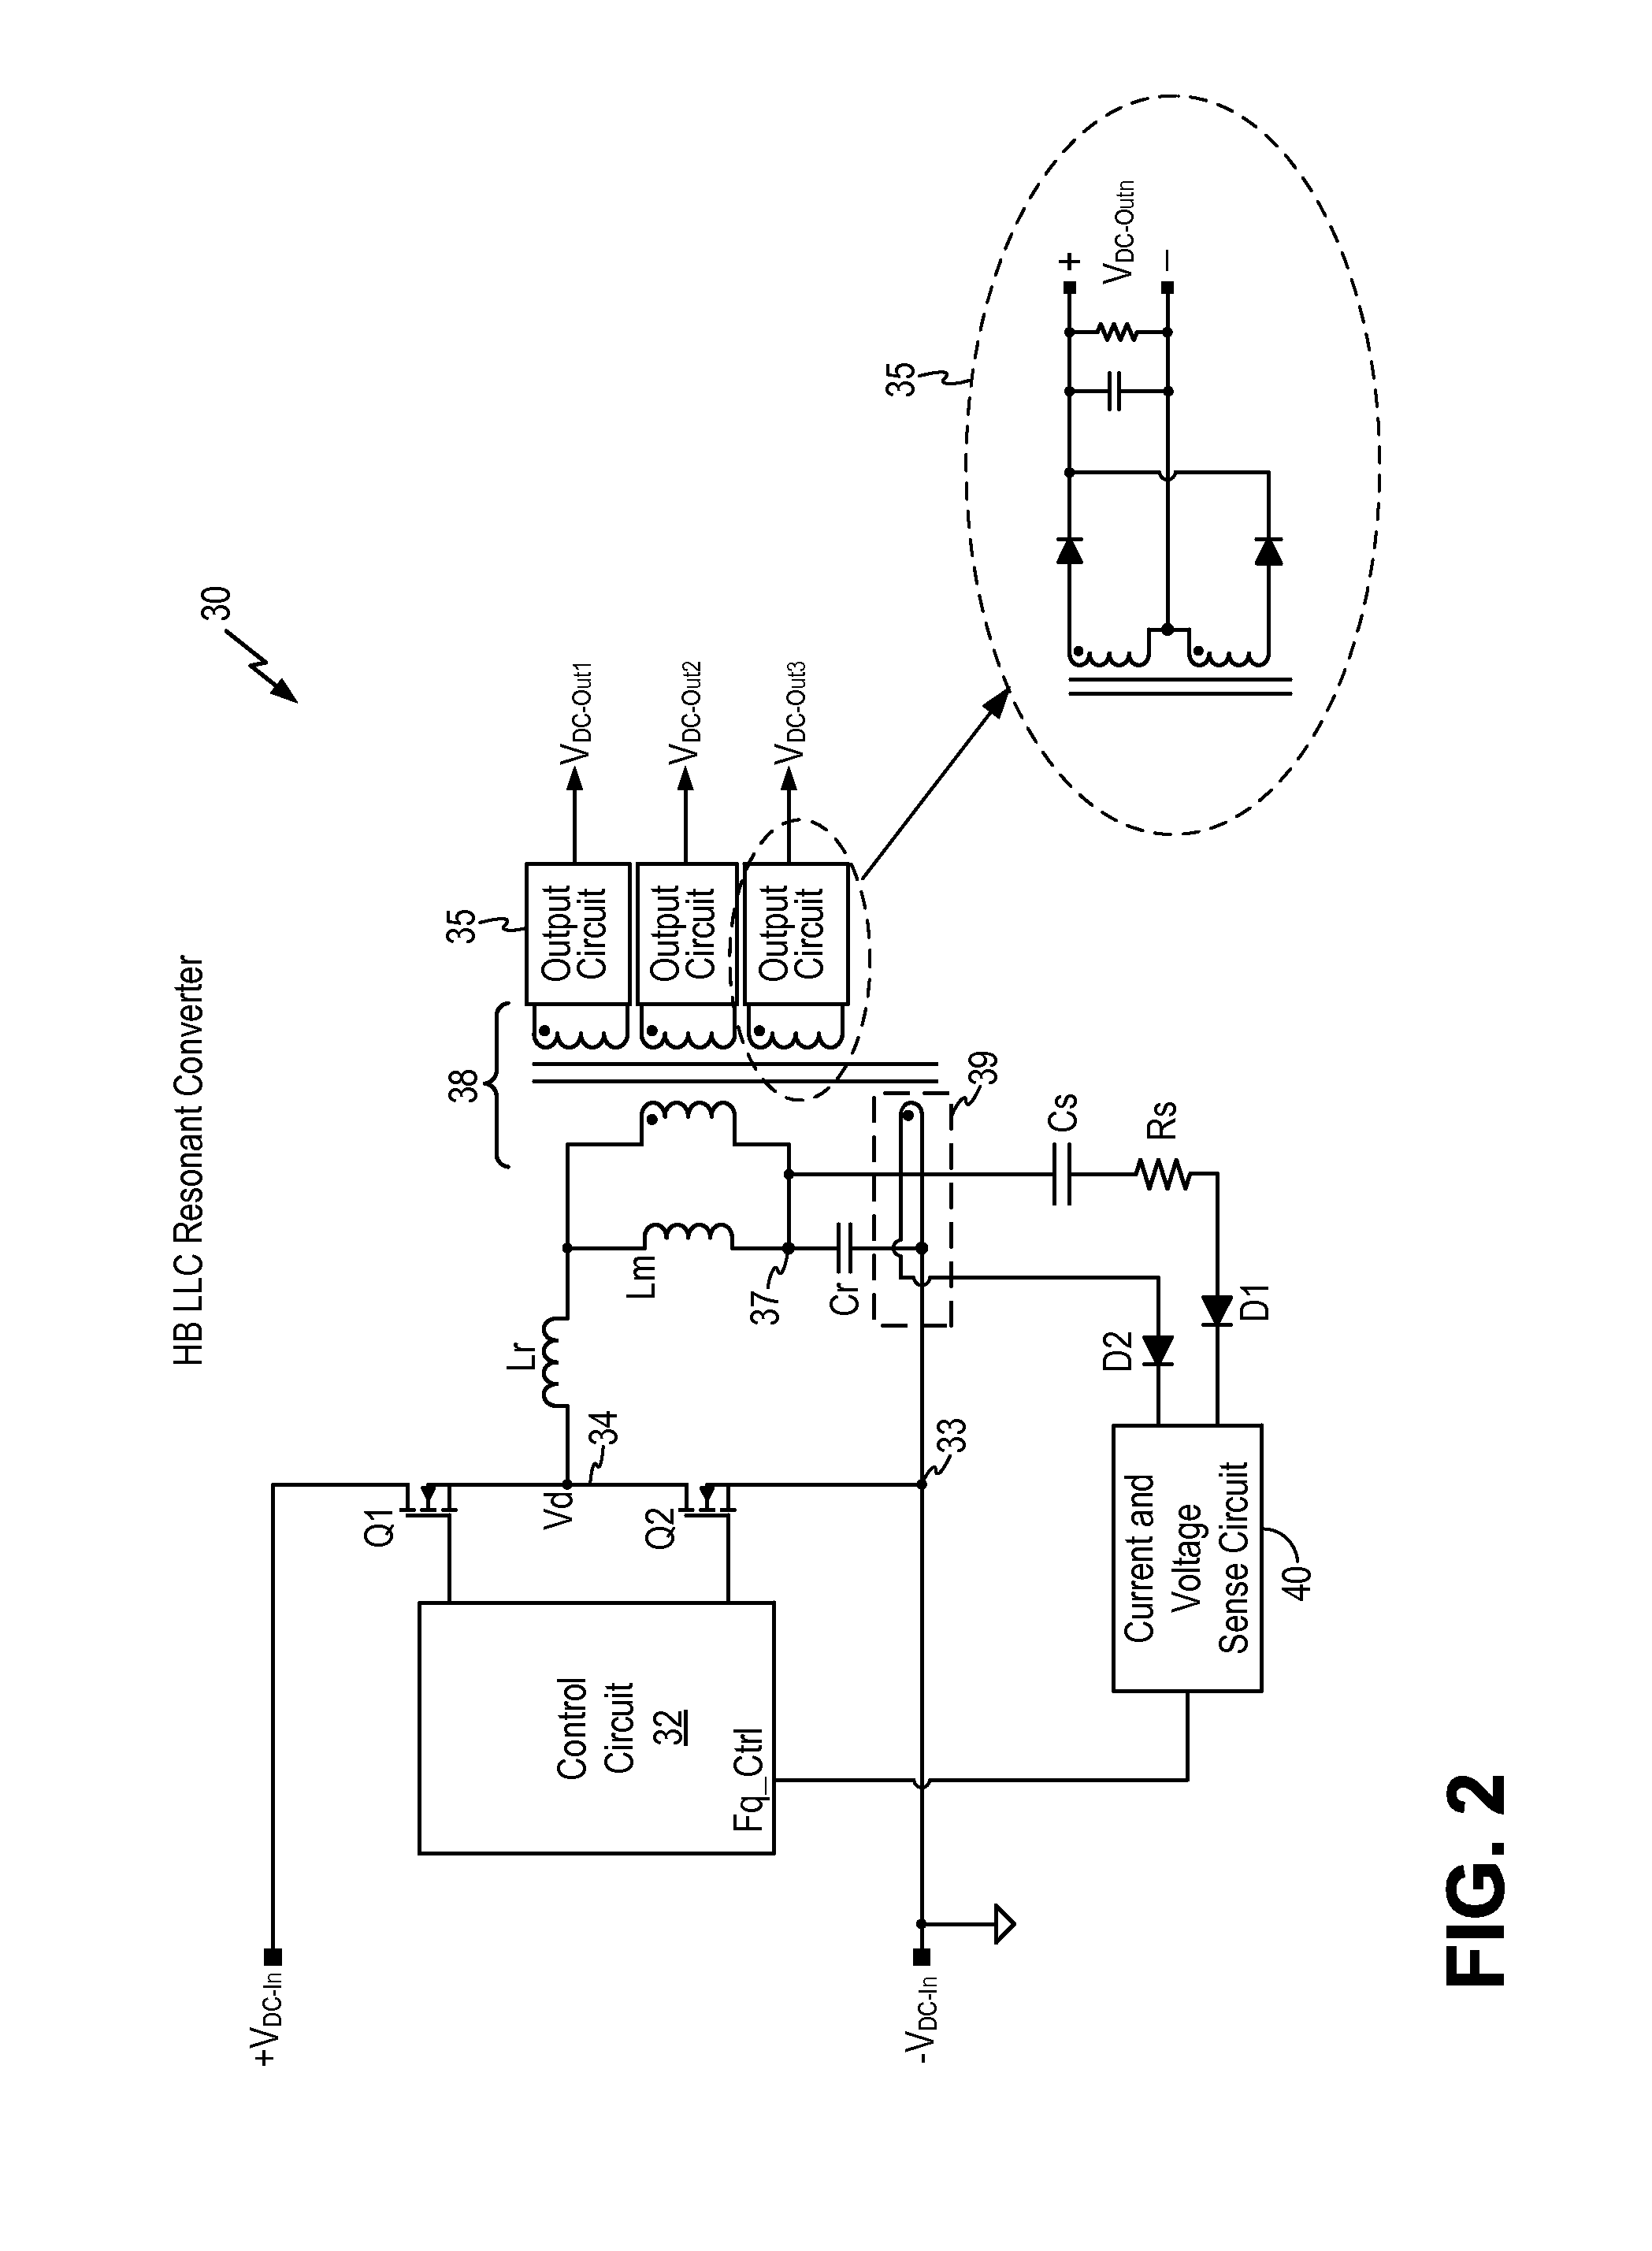 LLC resonant converter with lossless primary-side current feedback